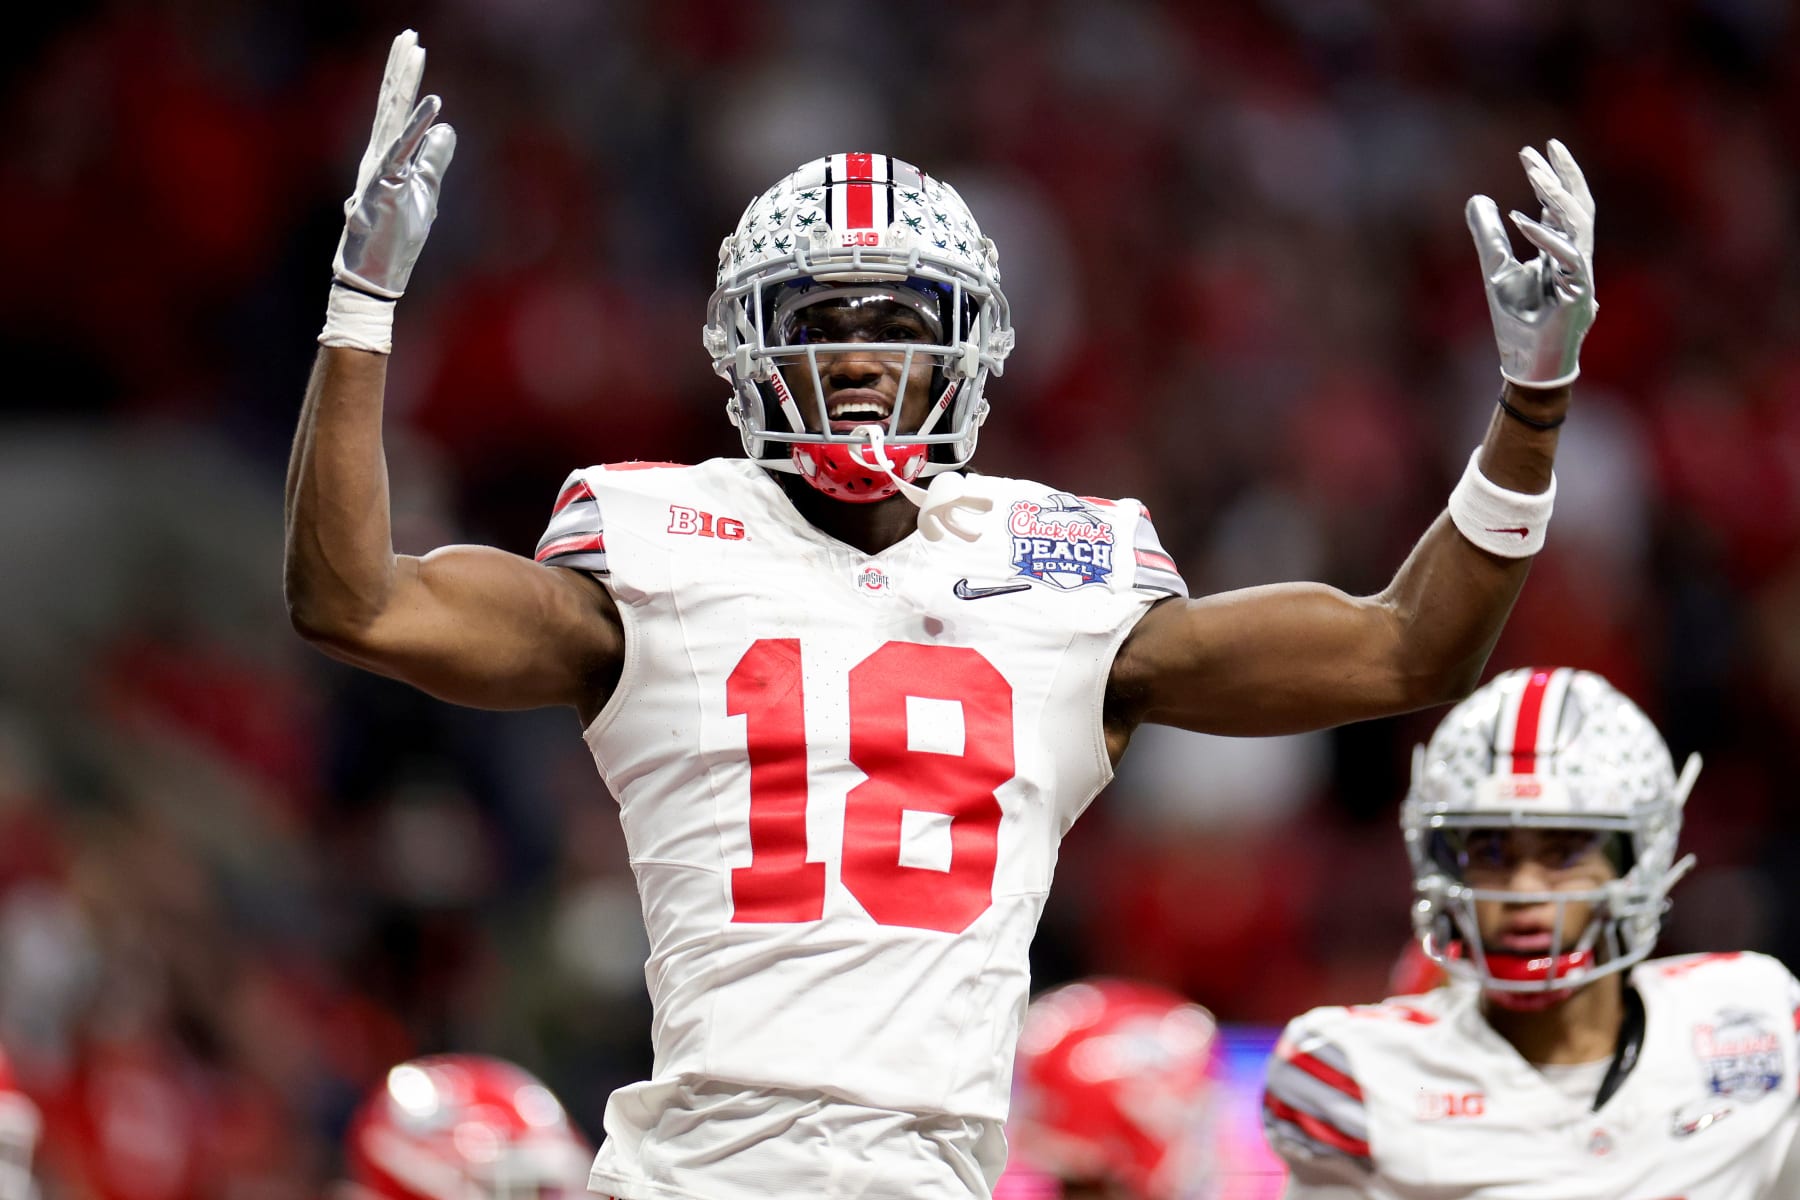 Marvin Harrison Jr. hopes to play in Indy for Big Ten Championship